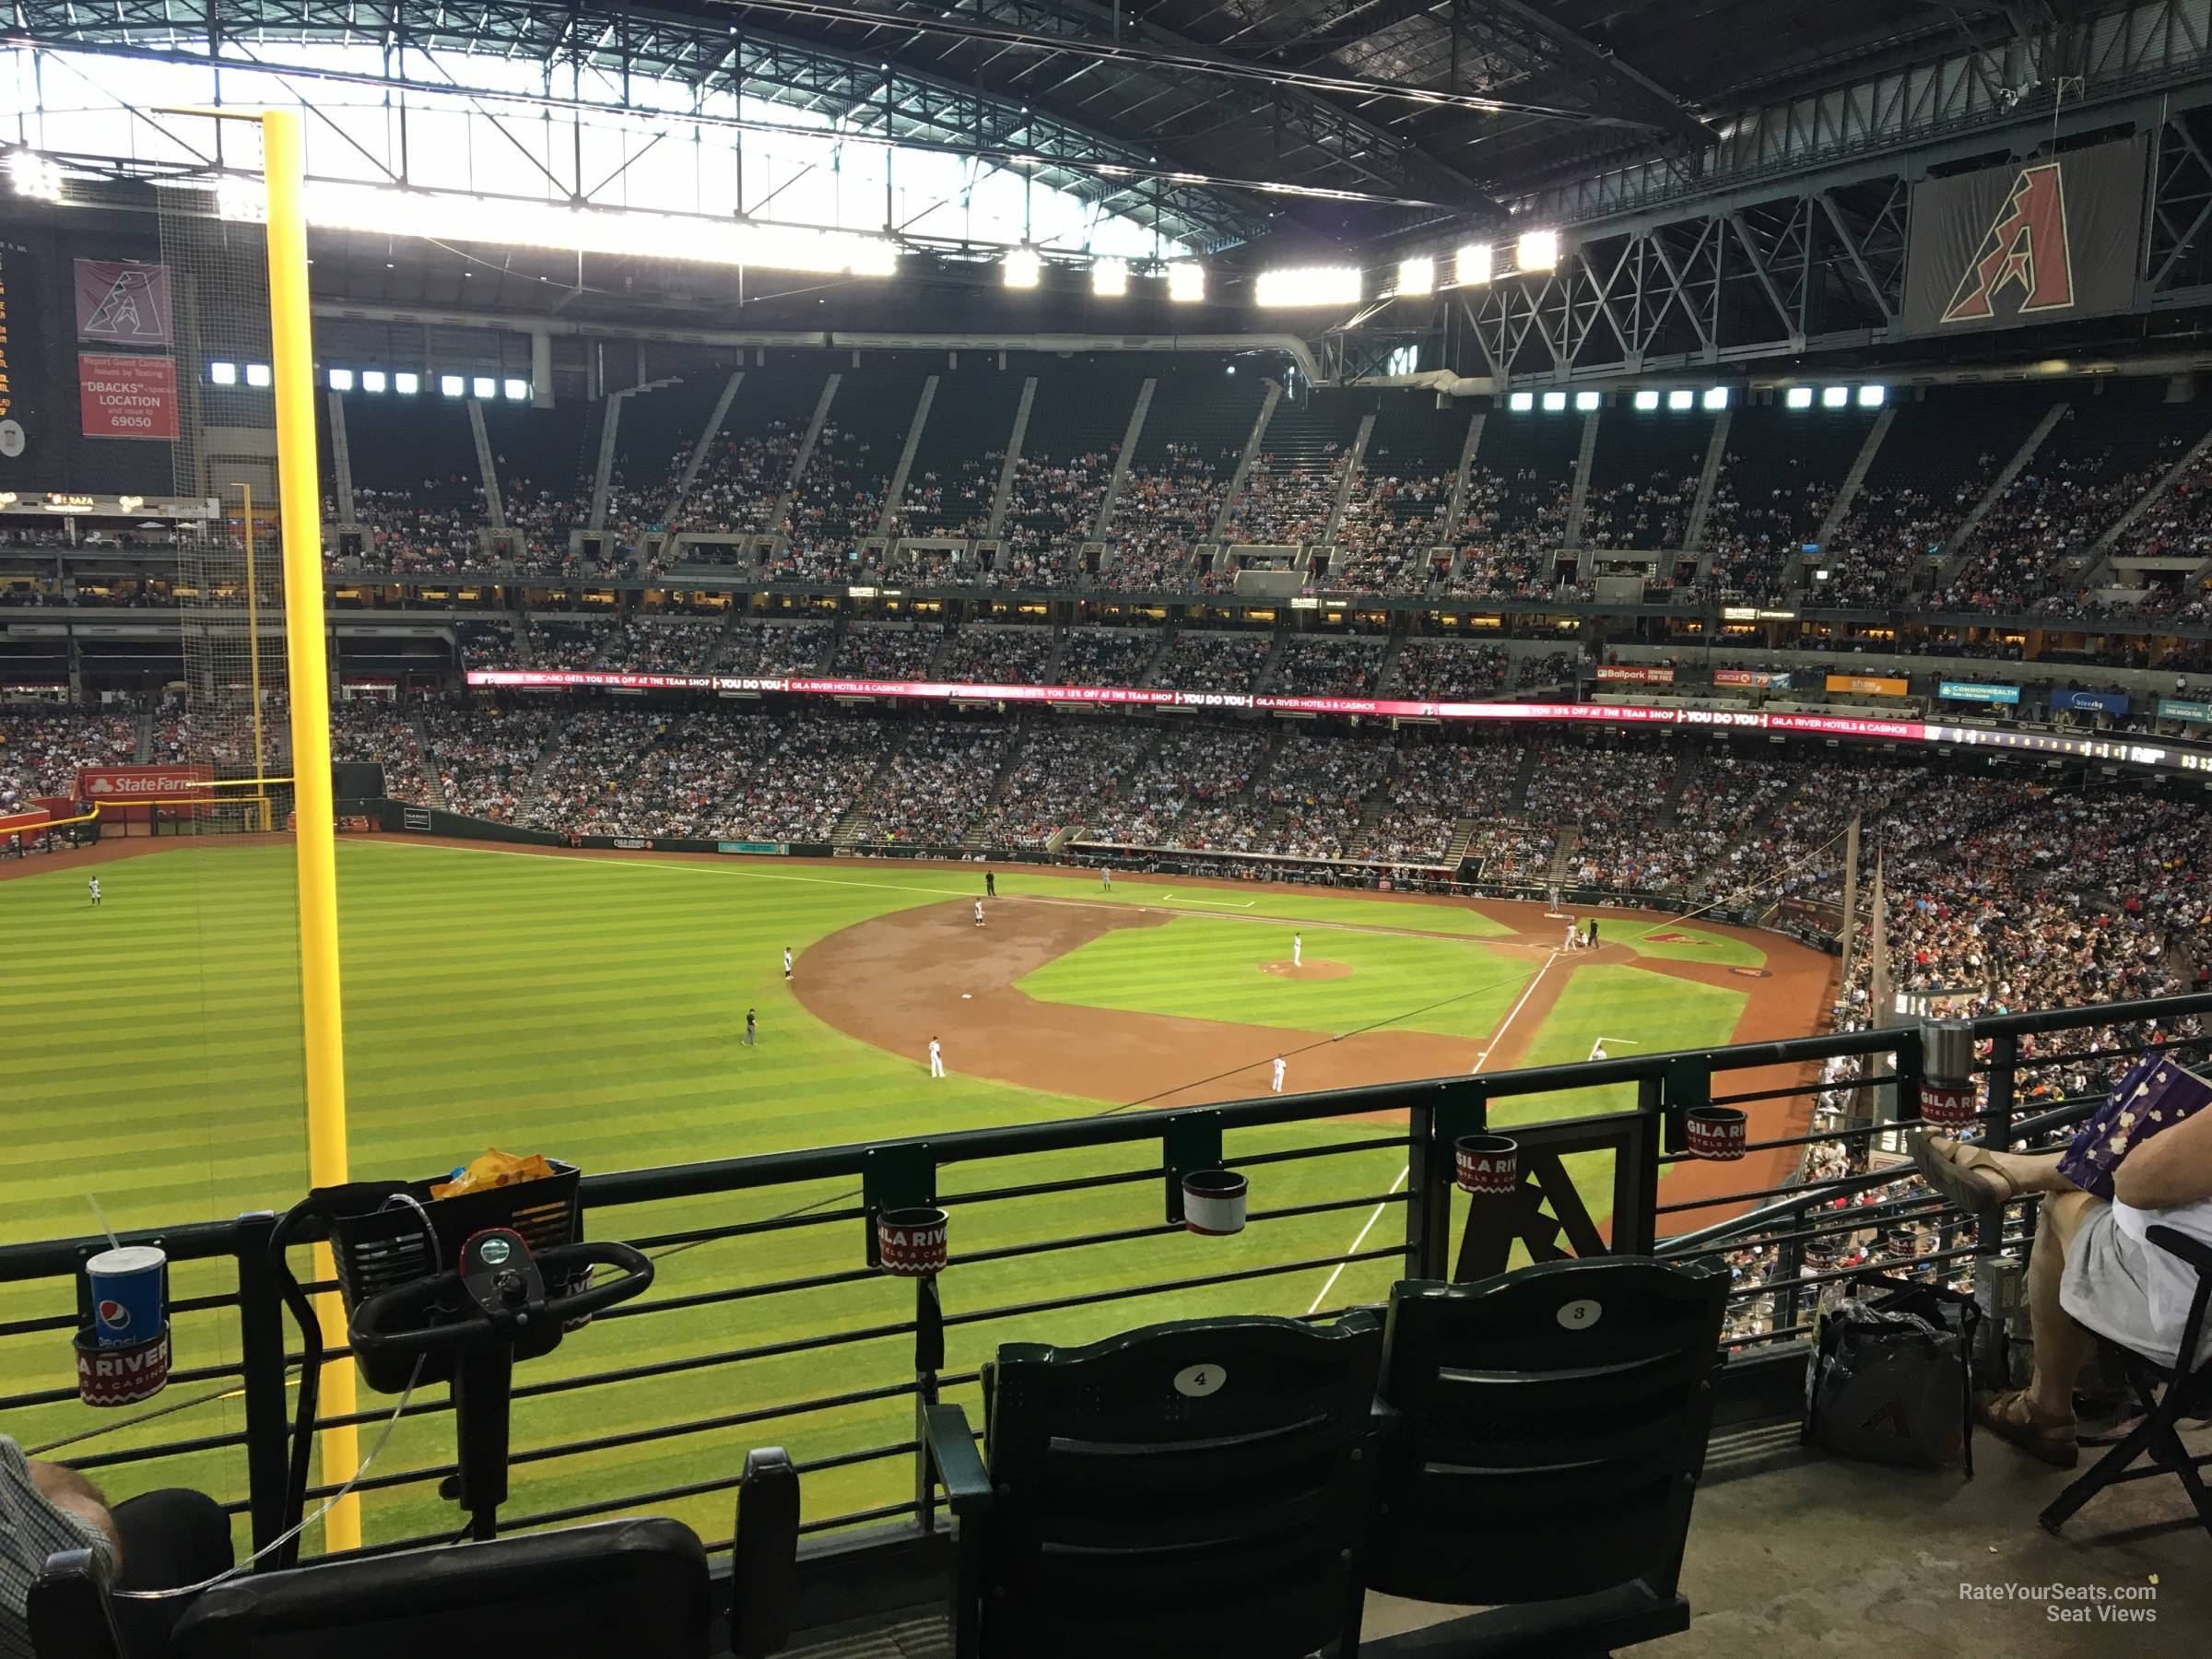 section 332w, row 4w seat view  for baseball - chase field